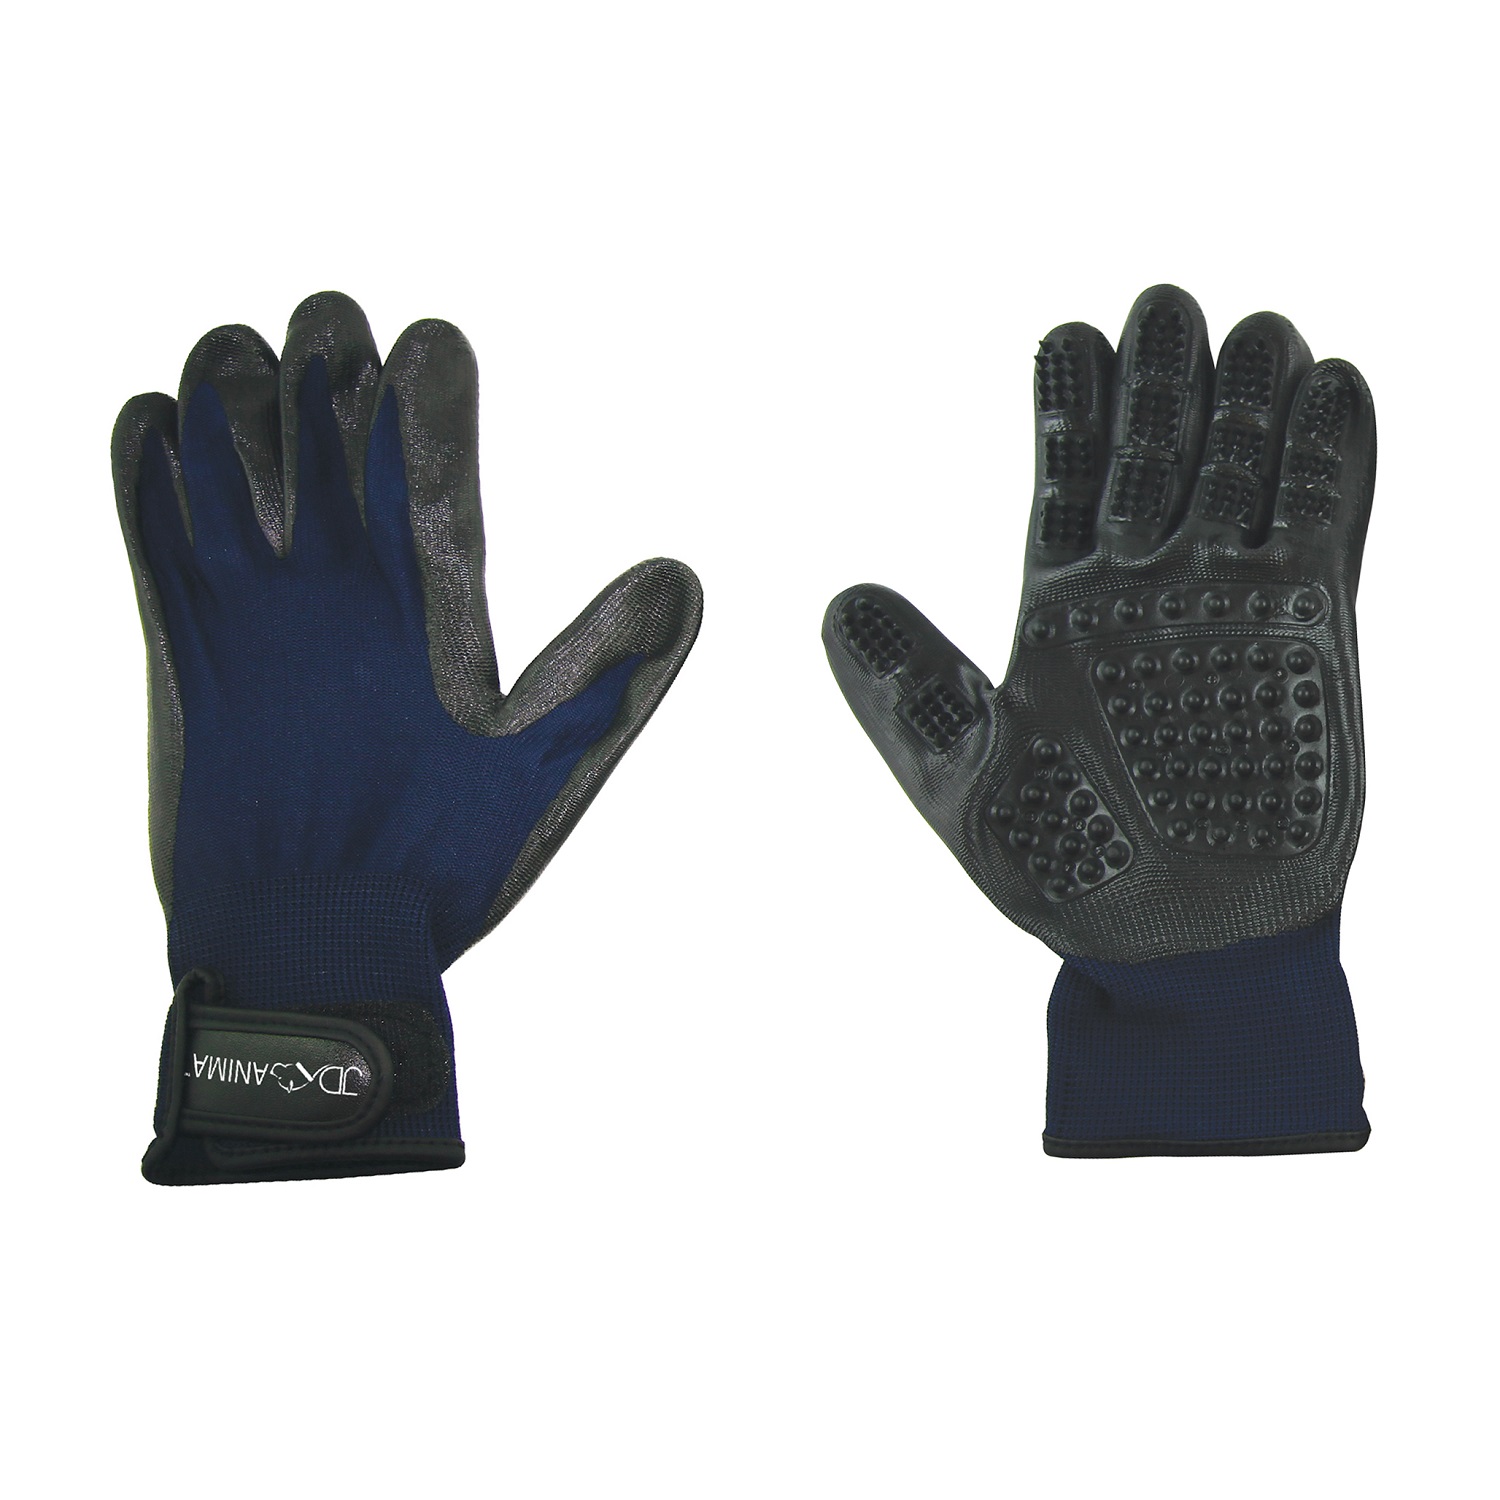 125451_Cats_Grooming Gloves 2 in 1 Pair_Small